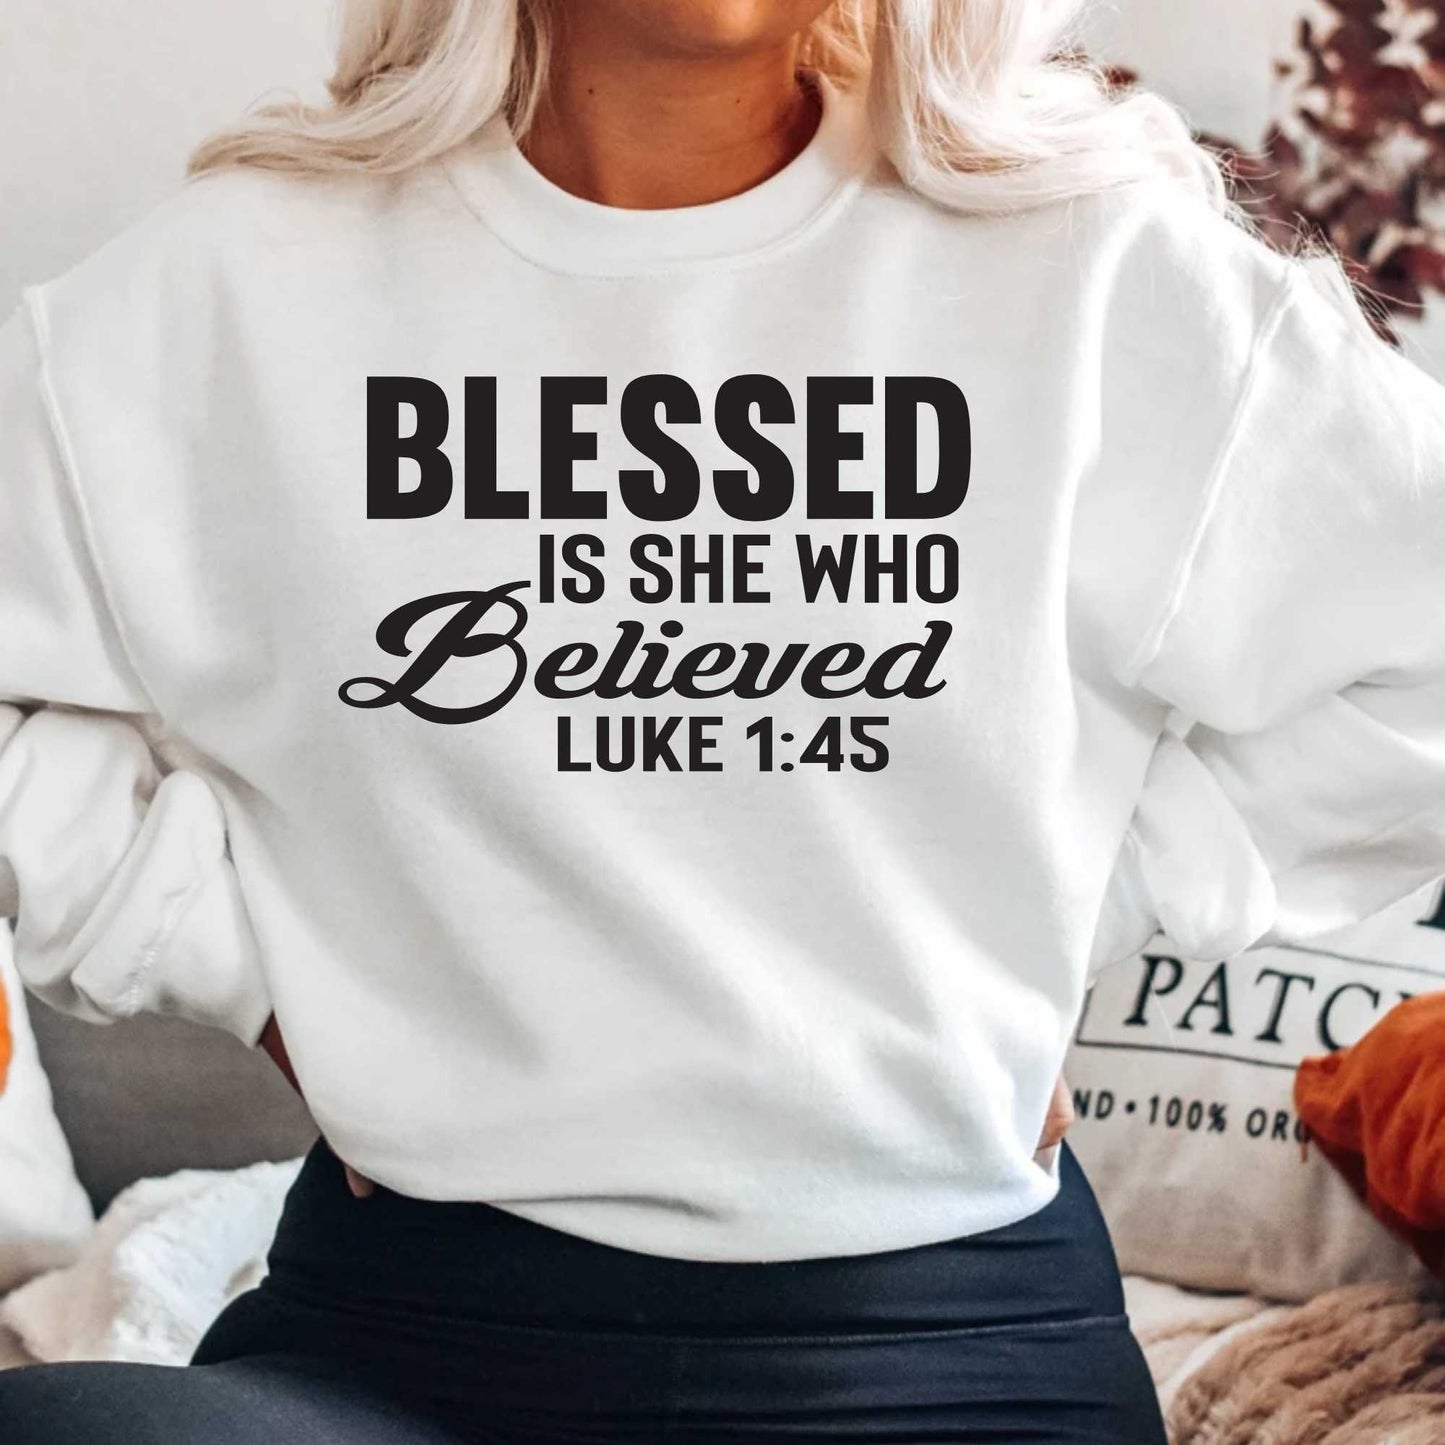 Blessed is She Who Believes, Bible Verses Shirts for Women